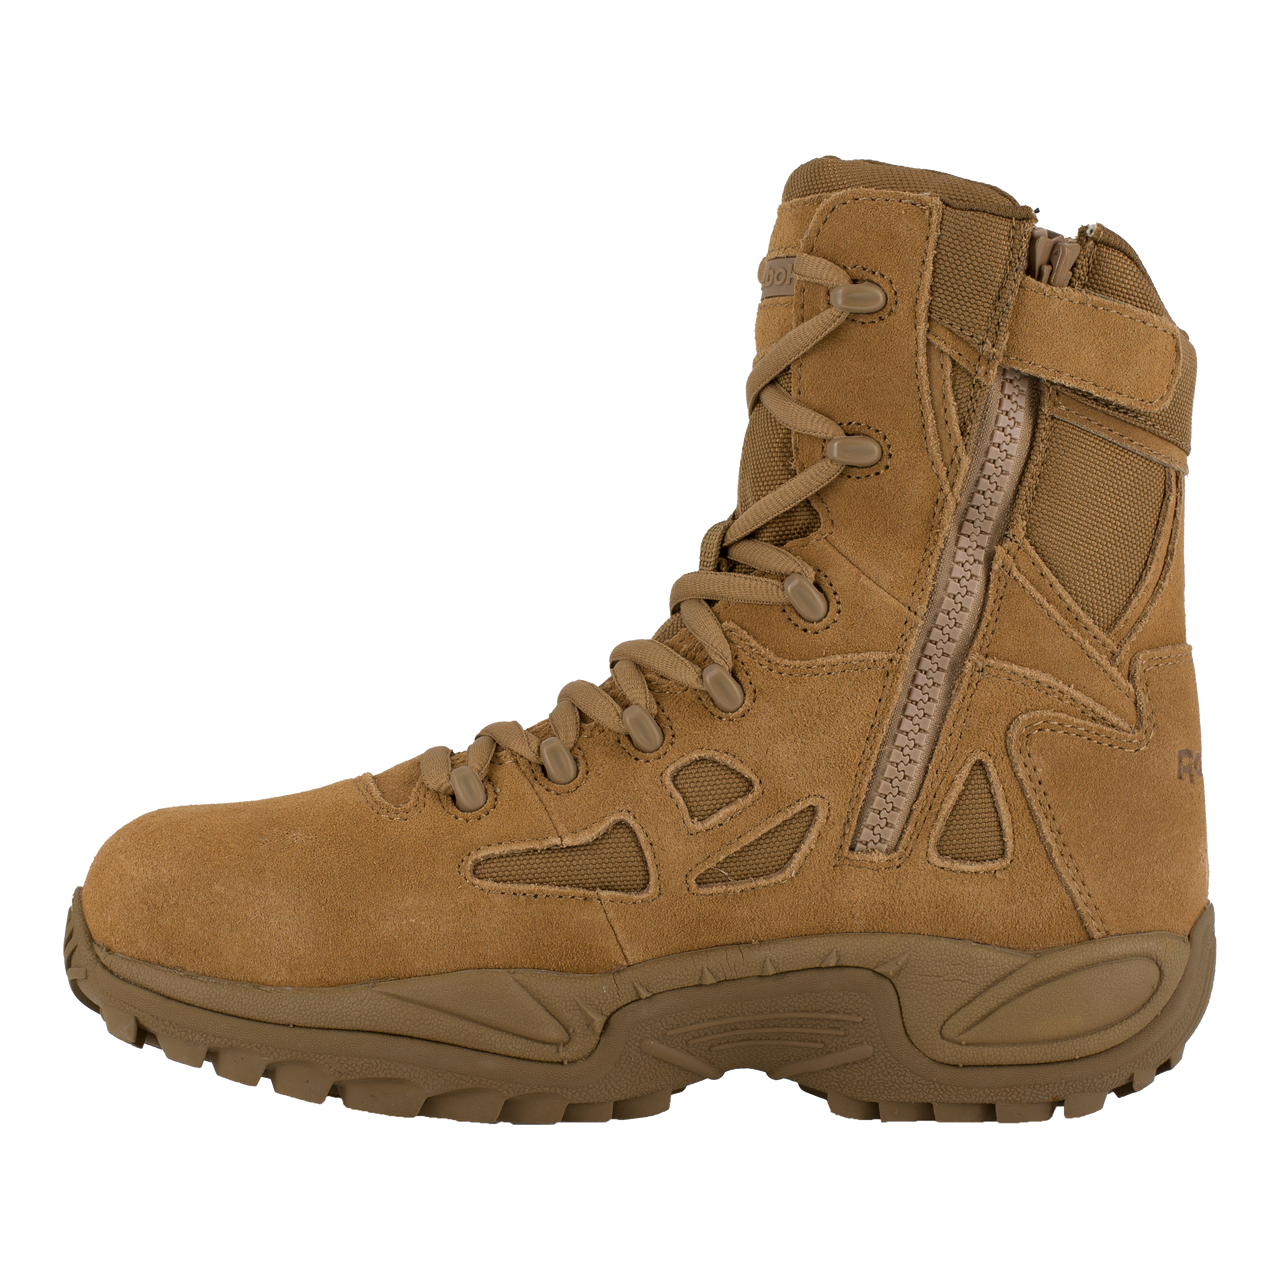 Reebok Rapid Response - RB8850 - Men's Military Boots with Side Zipper